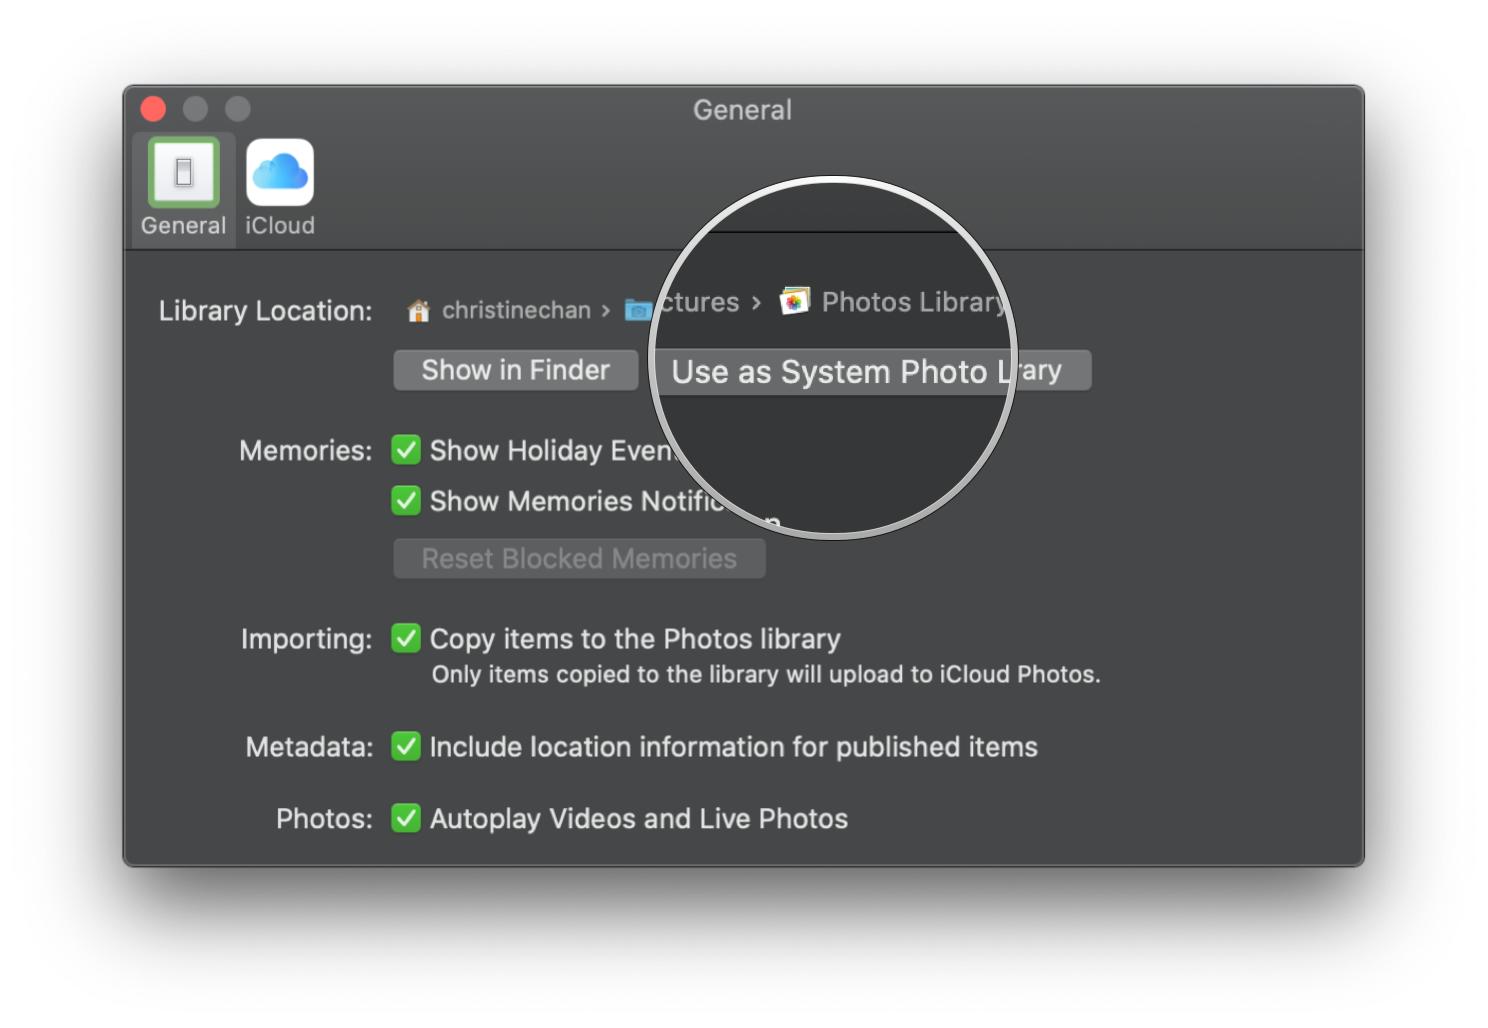 How to use iCloud Photo Library on macOS Catalina by showing steps: Click Use as System Photo Library if you are unable to turn on iCloud Photos